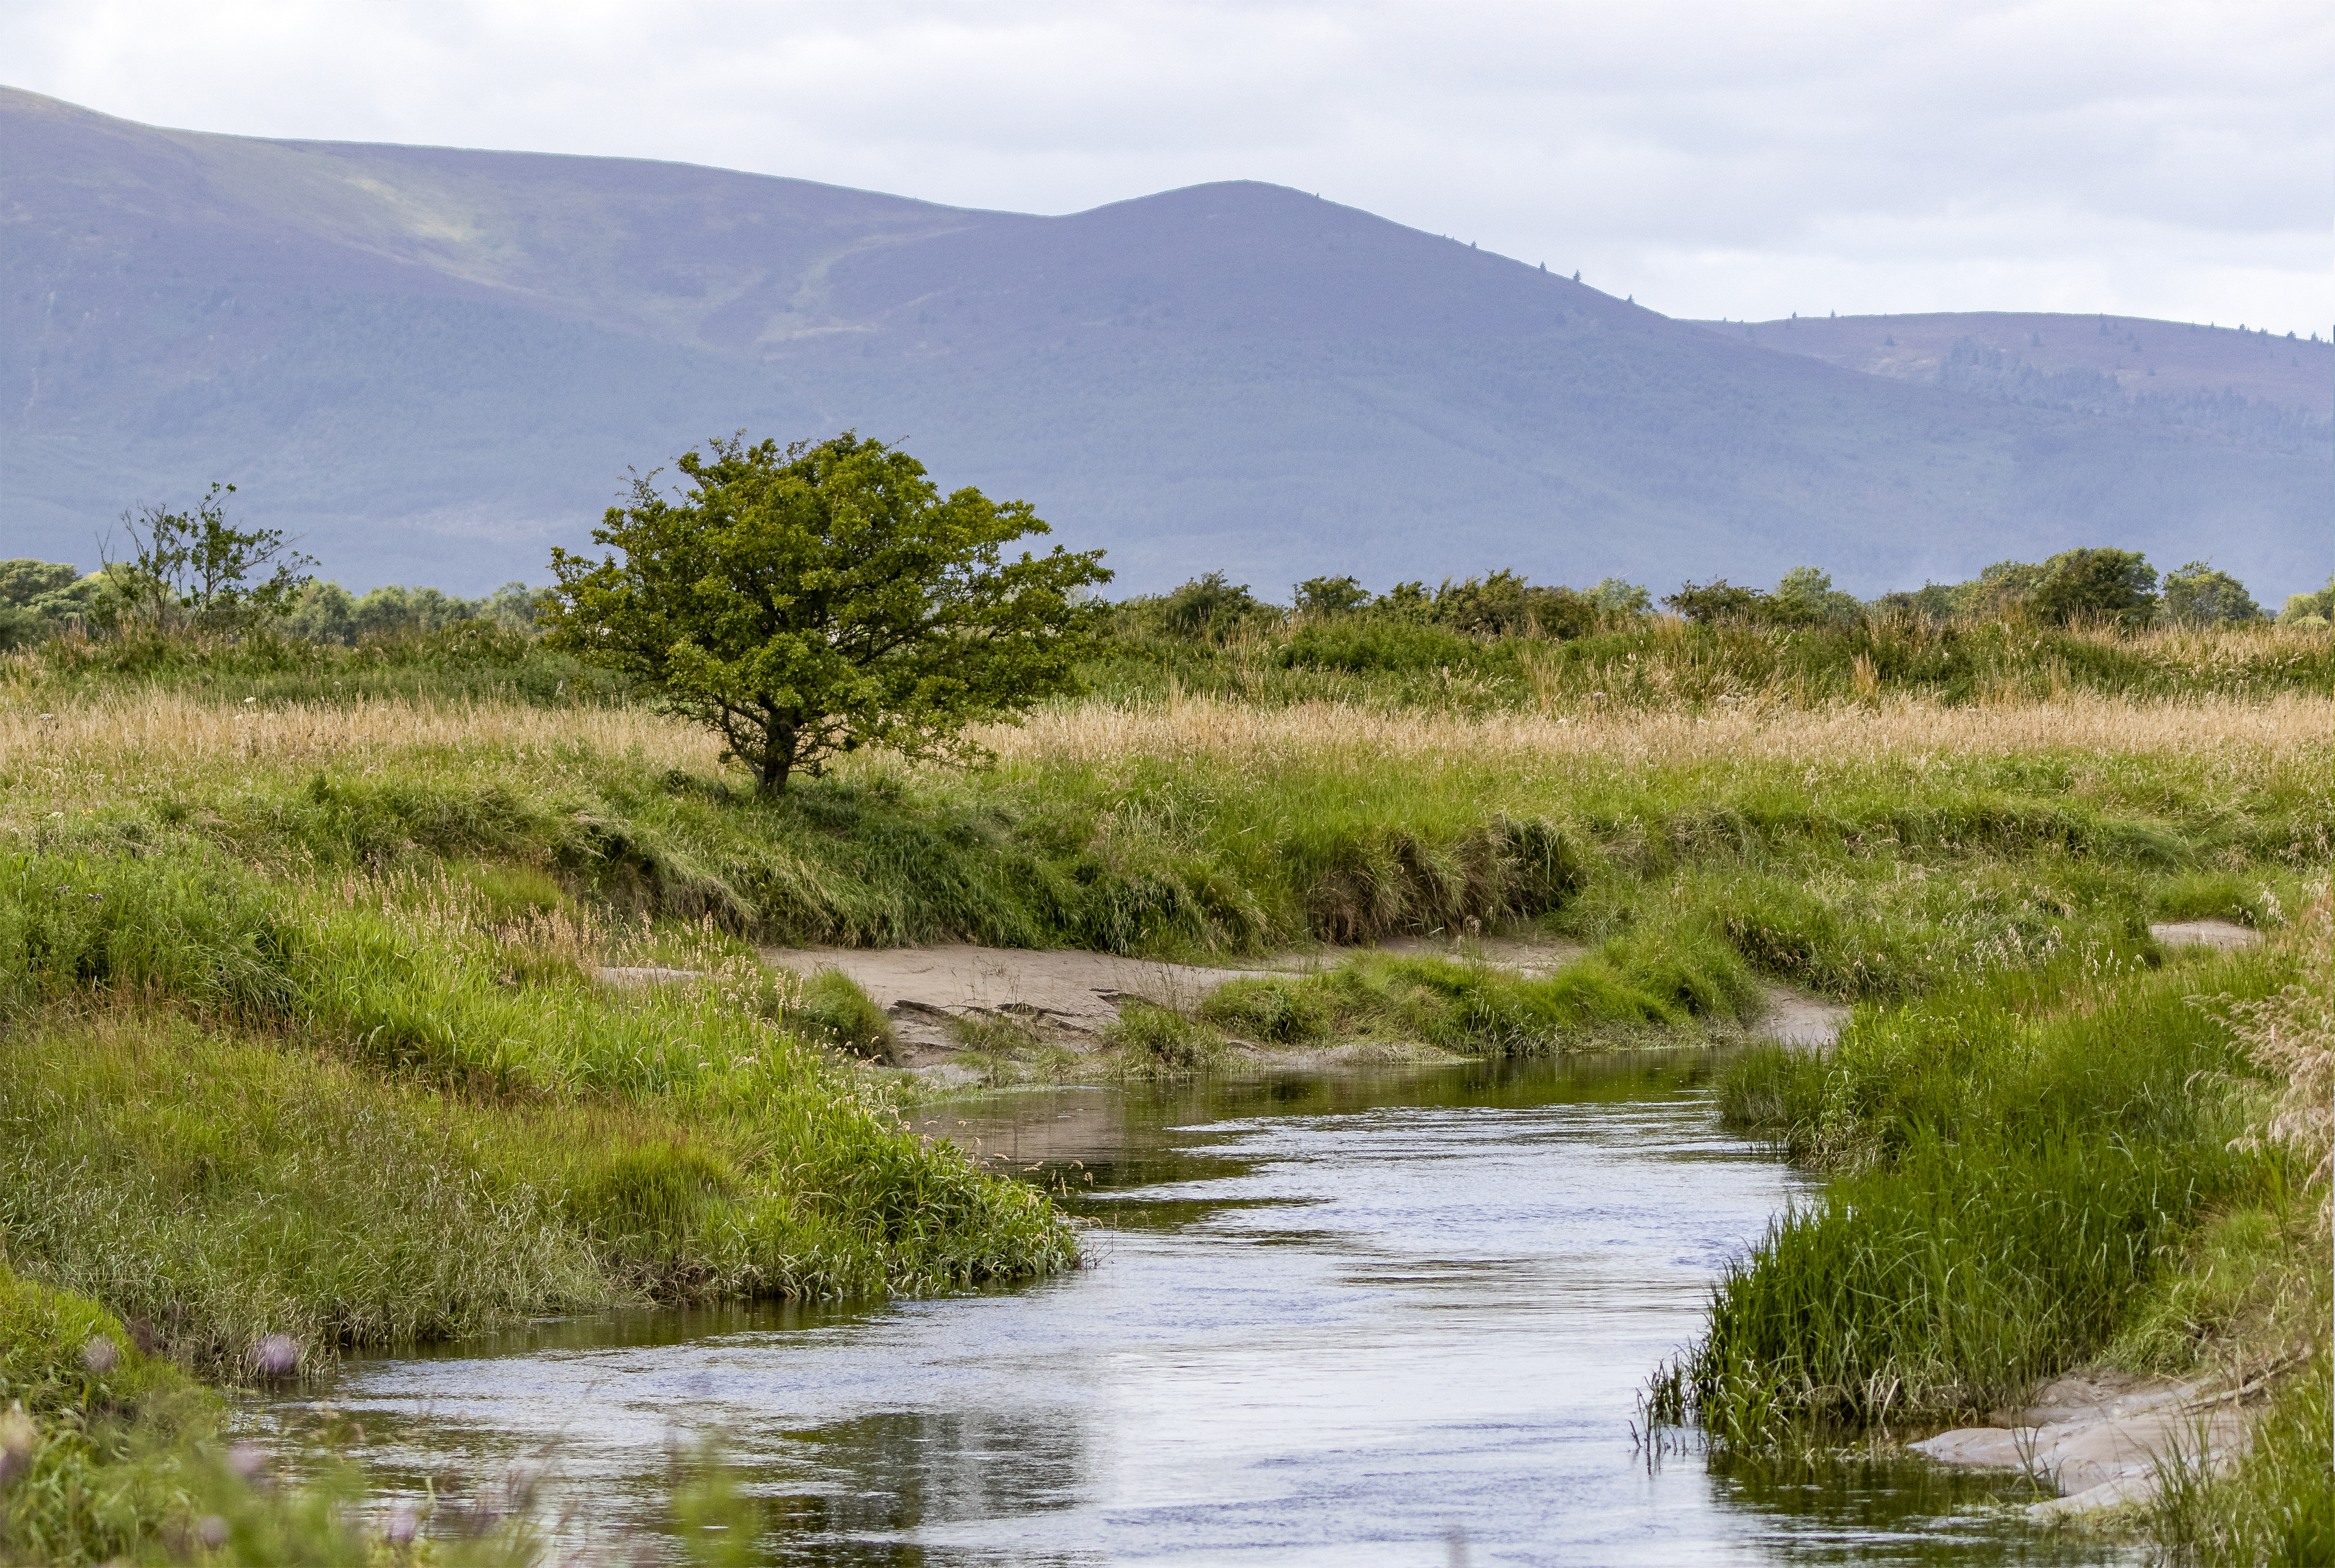 Make a splash at Caerlaverock, with an outdoors summer for all!